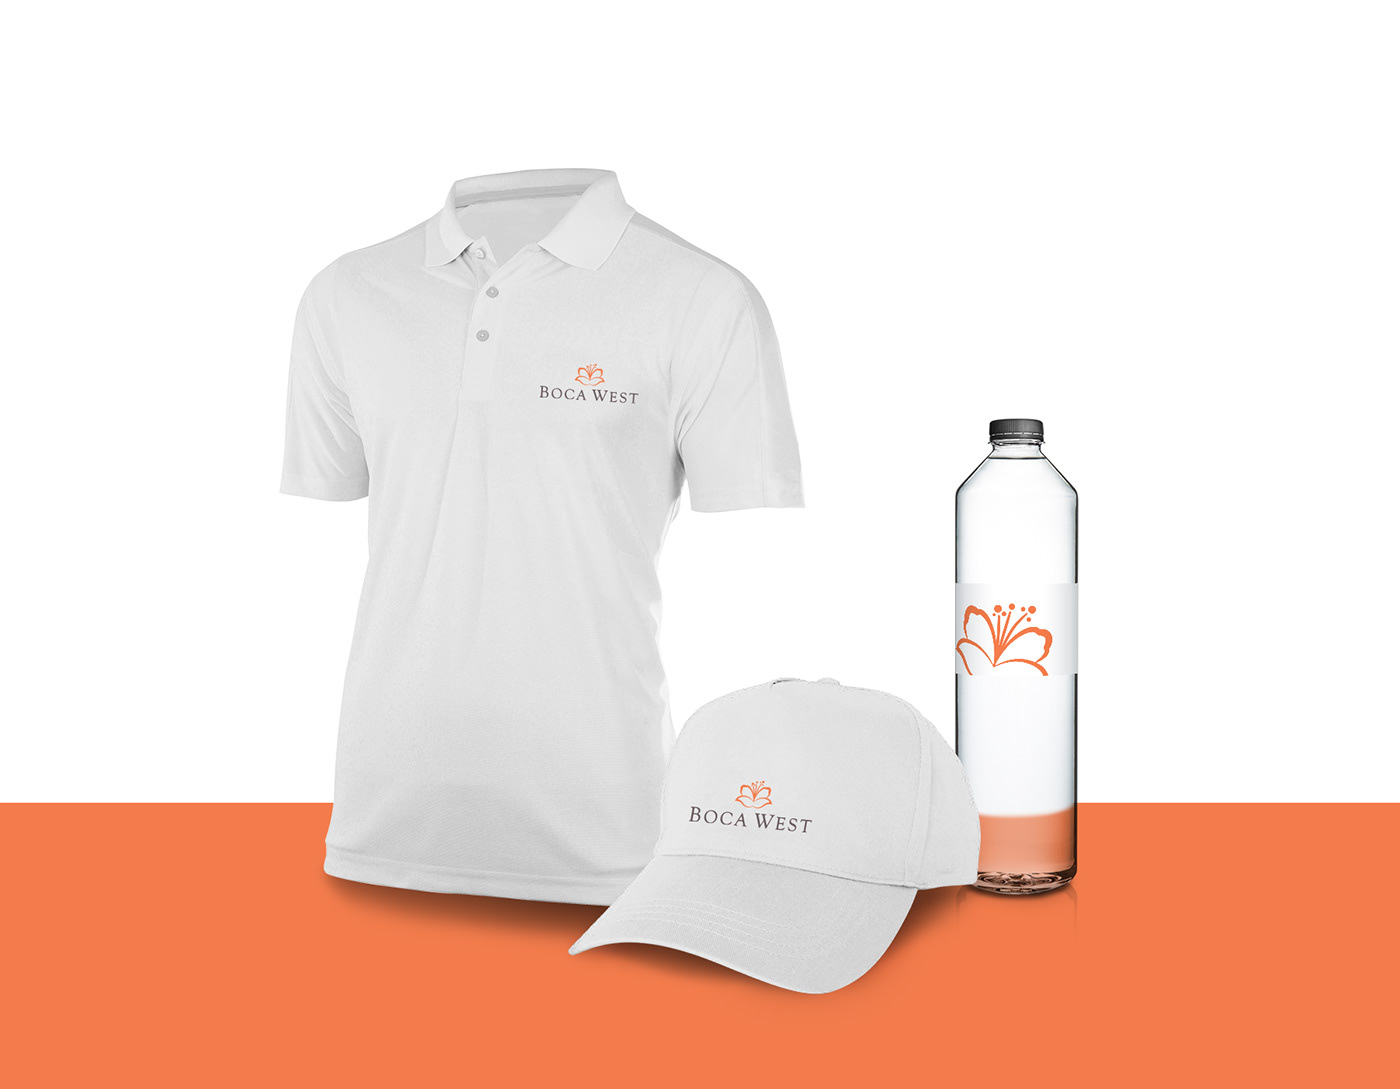 Various Boca West mockups of a t-shirt, hat, and water bottle labeling.